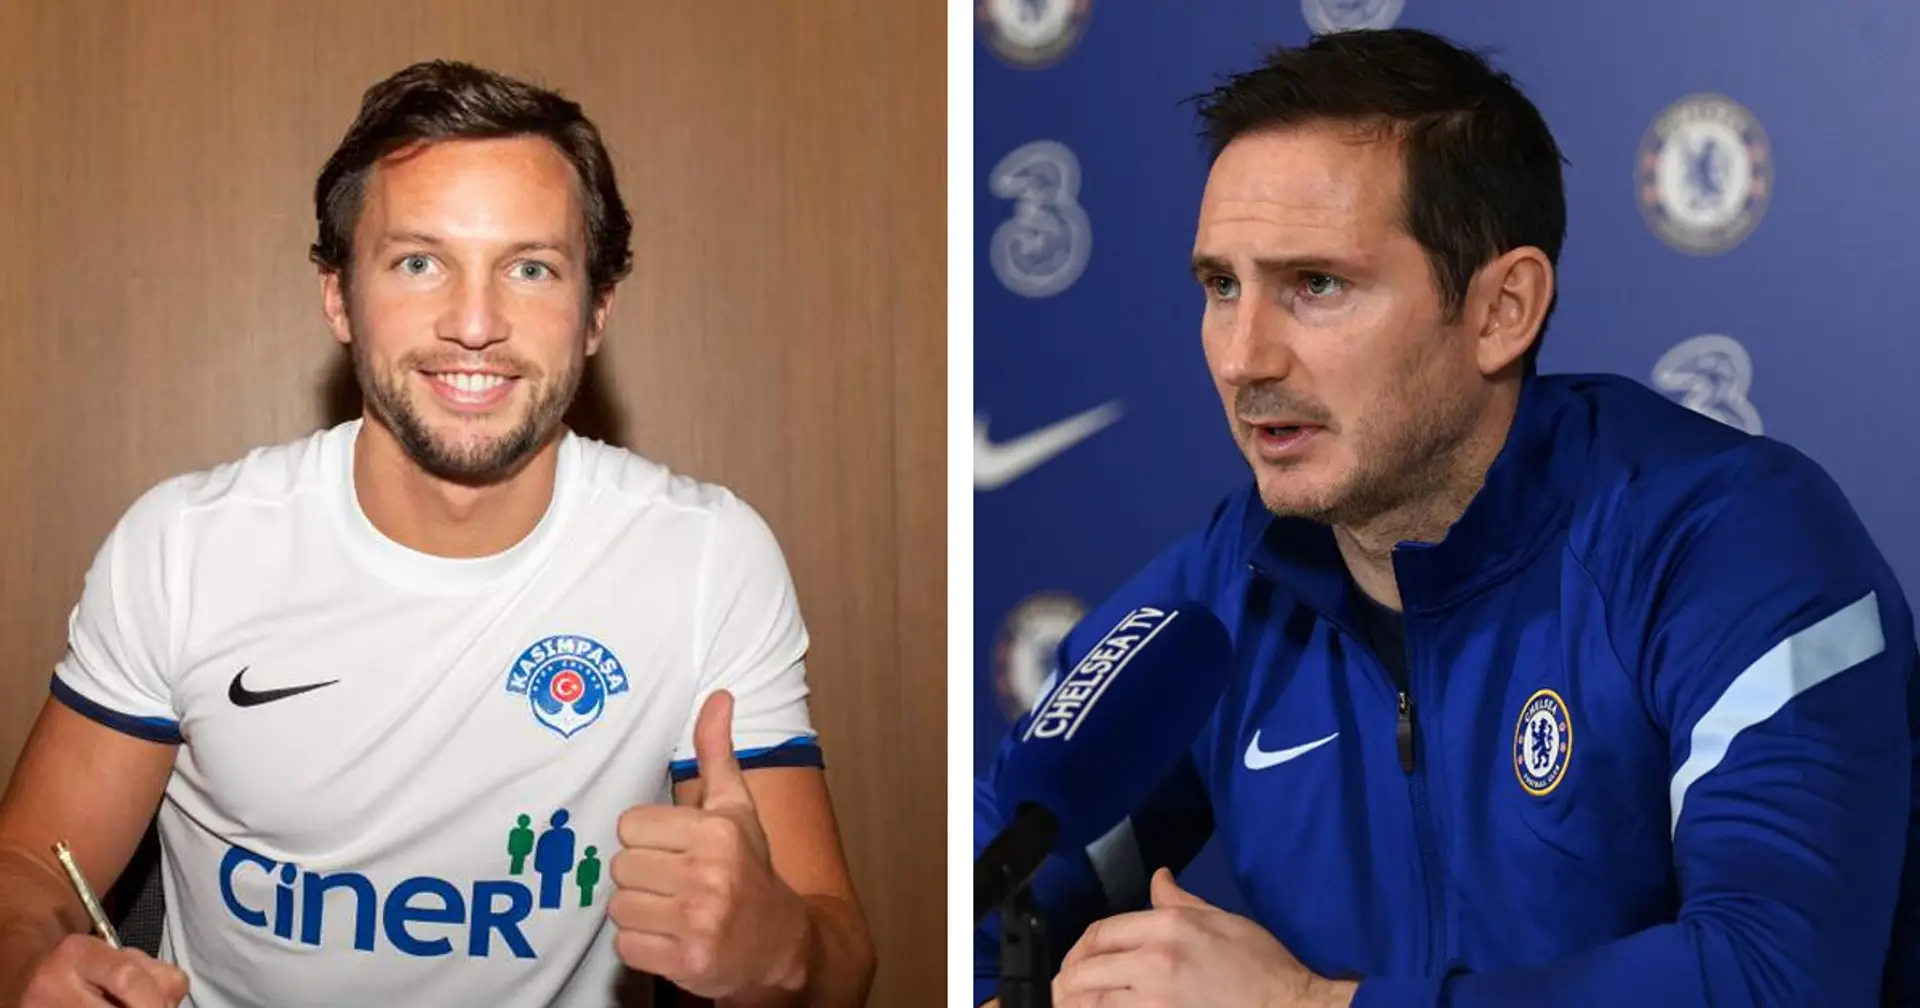 'It’s a positive move that he is going to play football': Frank Lampard comments on Danny Drinkwater's loan move